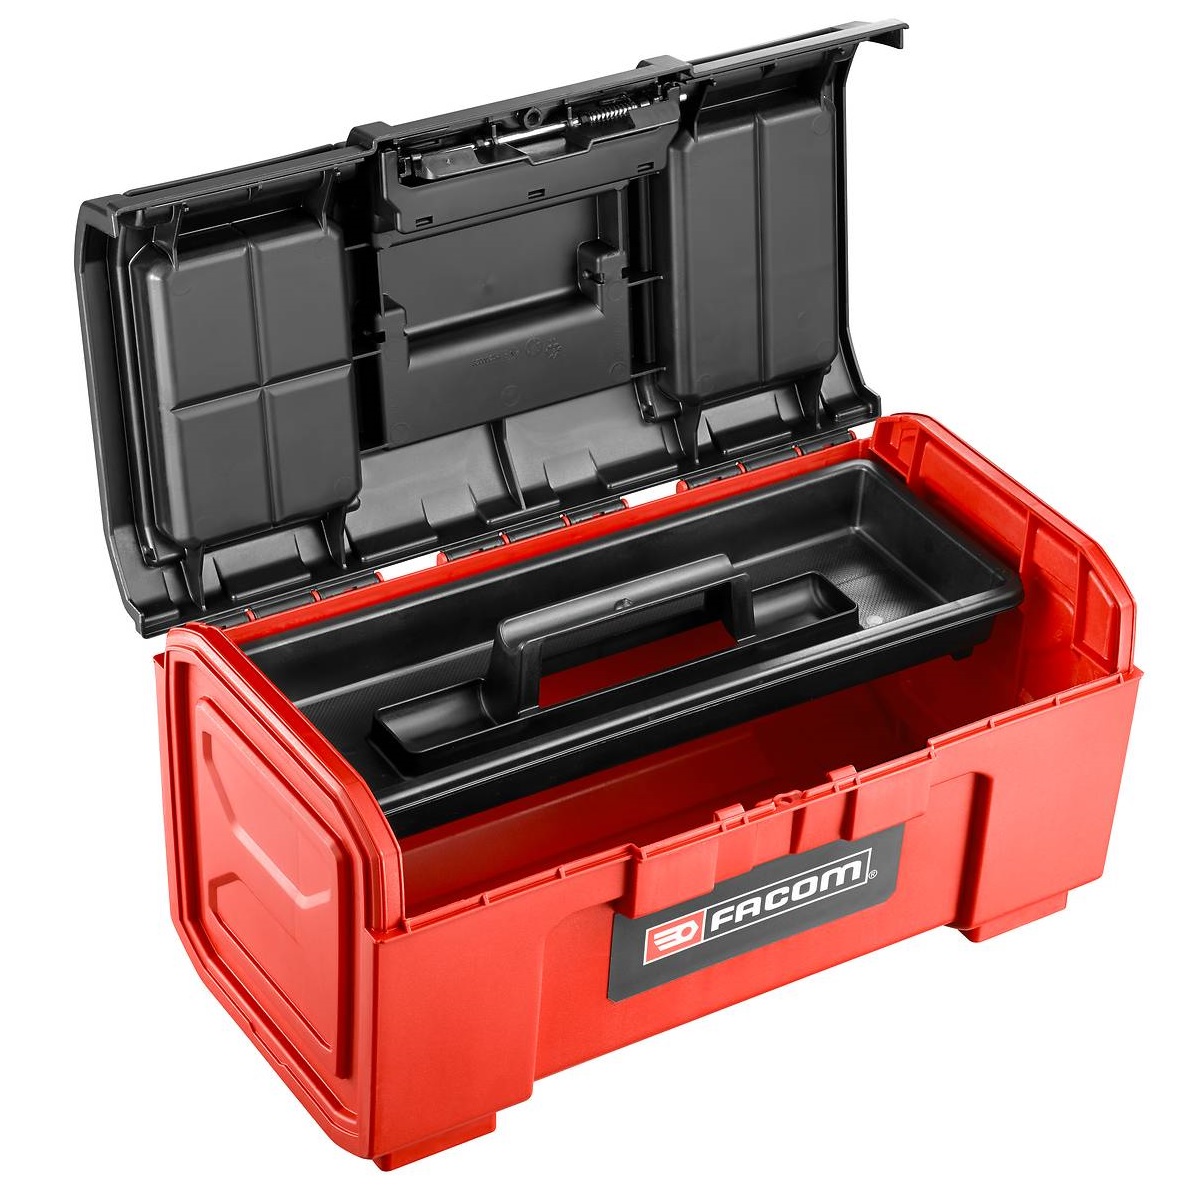 FACOM TOOLBOX RED BLACK PLASTIC WITH TOTE TRAY 410mm LONG 41CM 